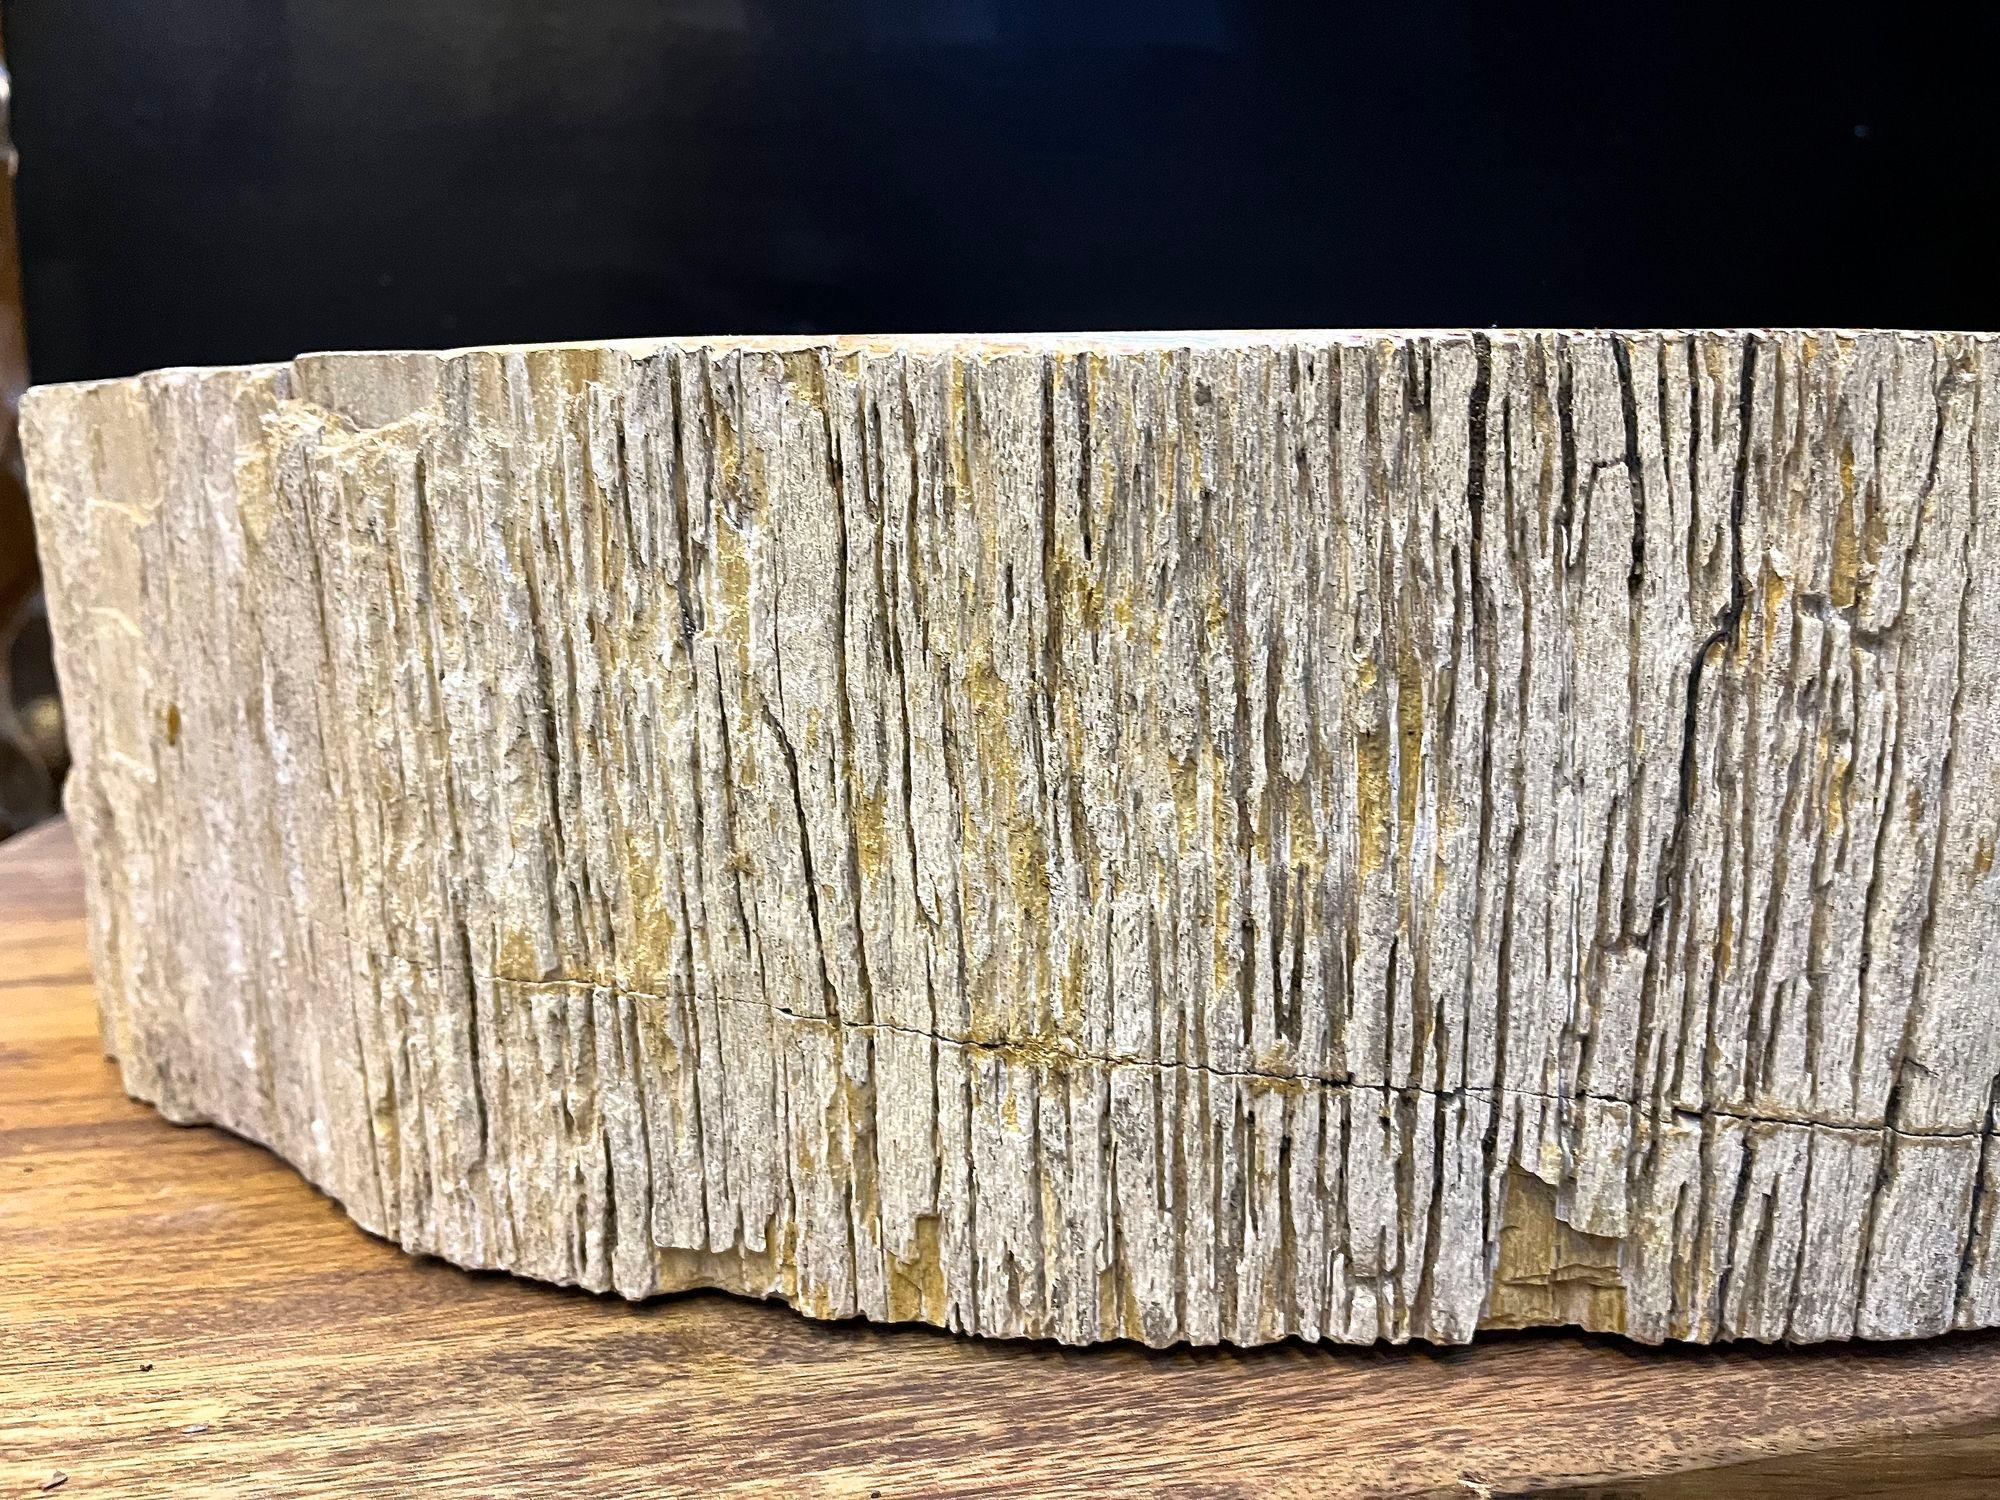 Exceptional large petrified wood sink in absolute top quality. This organic modern sink impresses with a beautiful shape and a fantastic natural coloration in beige, brown and grey tones which are matchless. The inside of the sink shows a polished